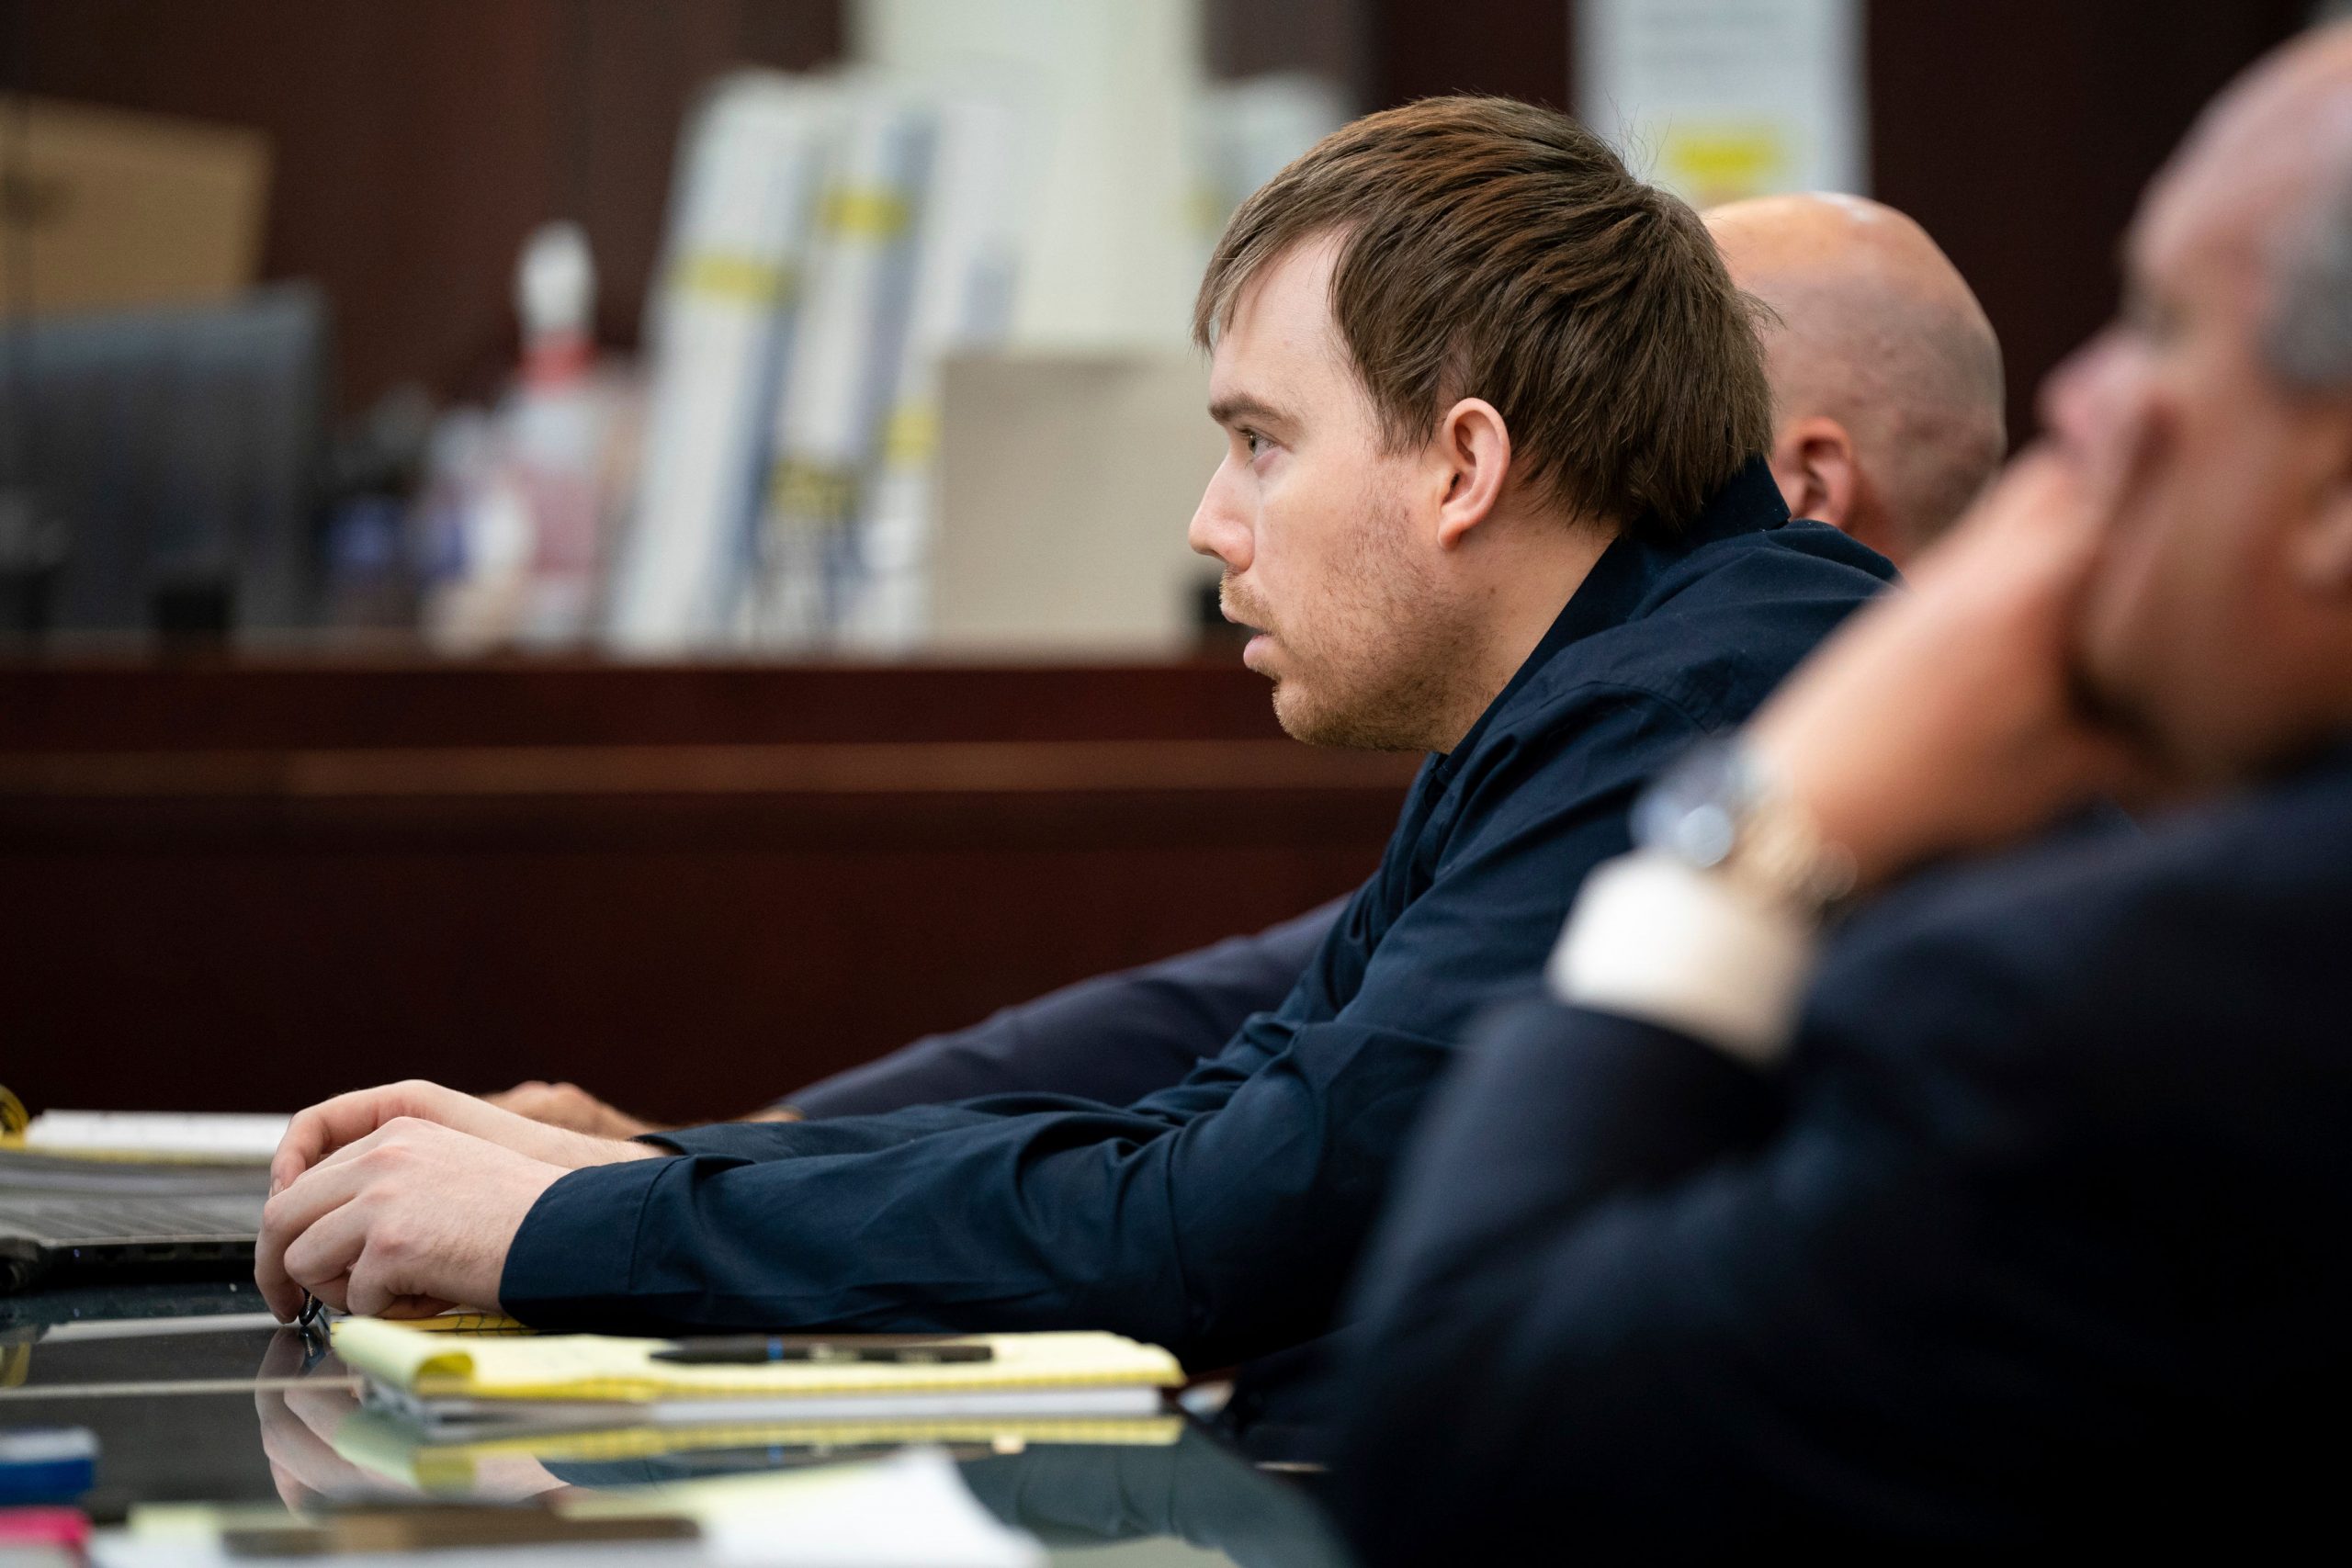 Nashville Waffle House shooter Travis Reinking convicted on 4 counts of murder